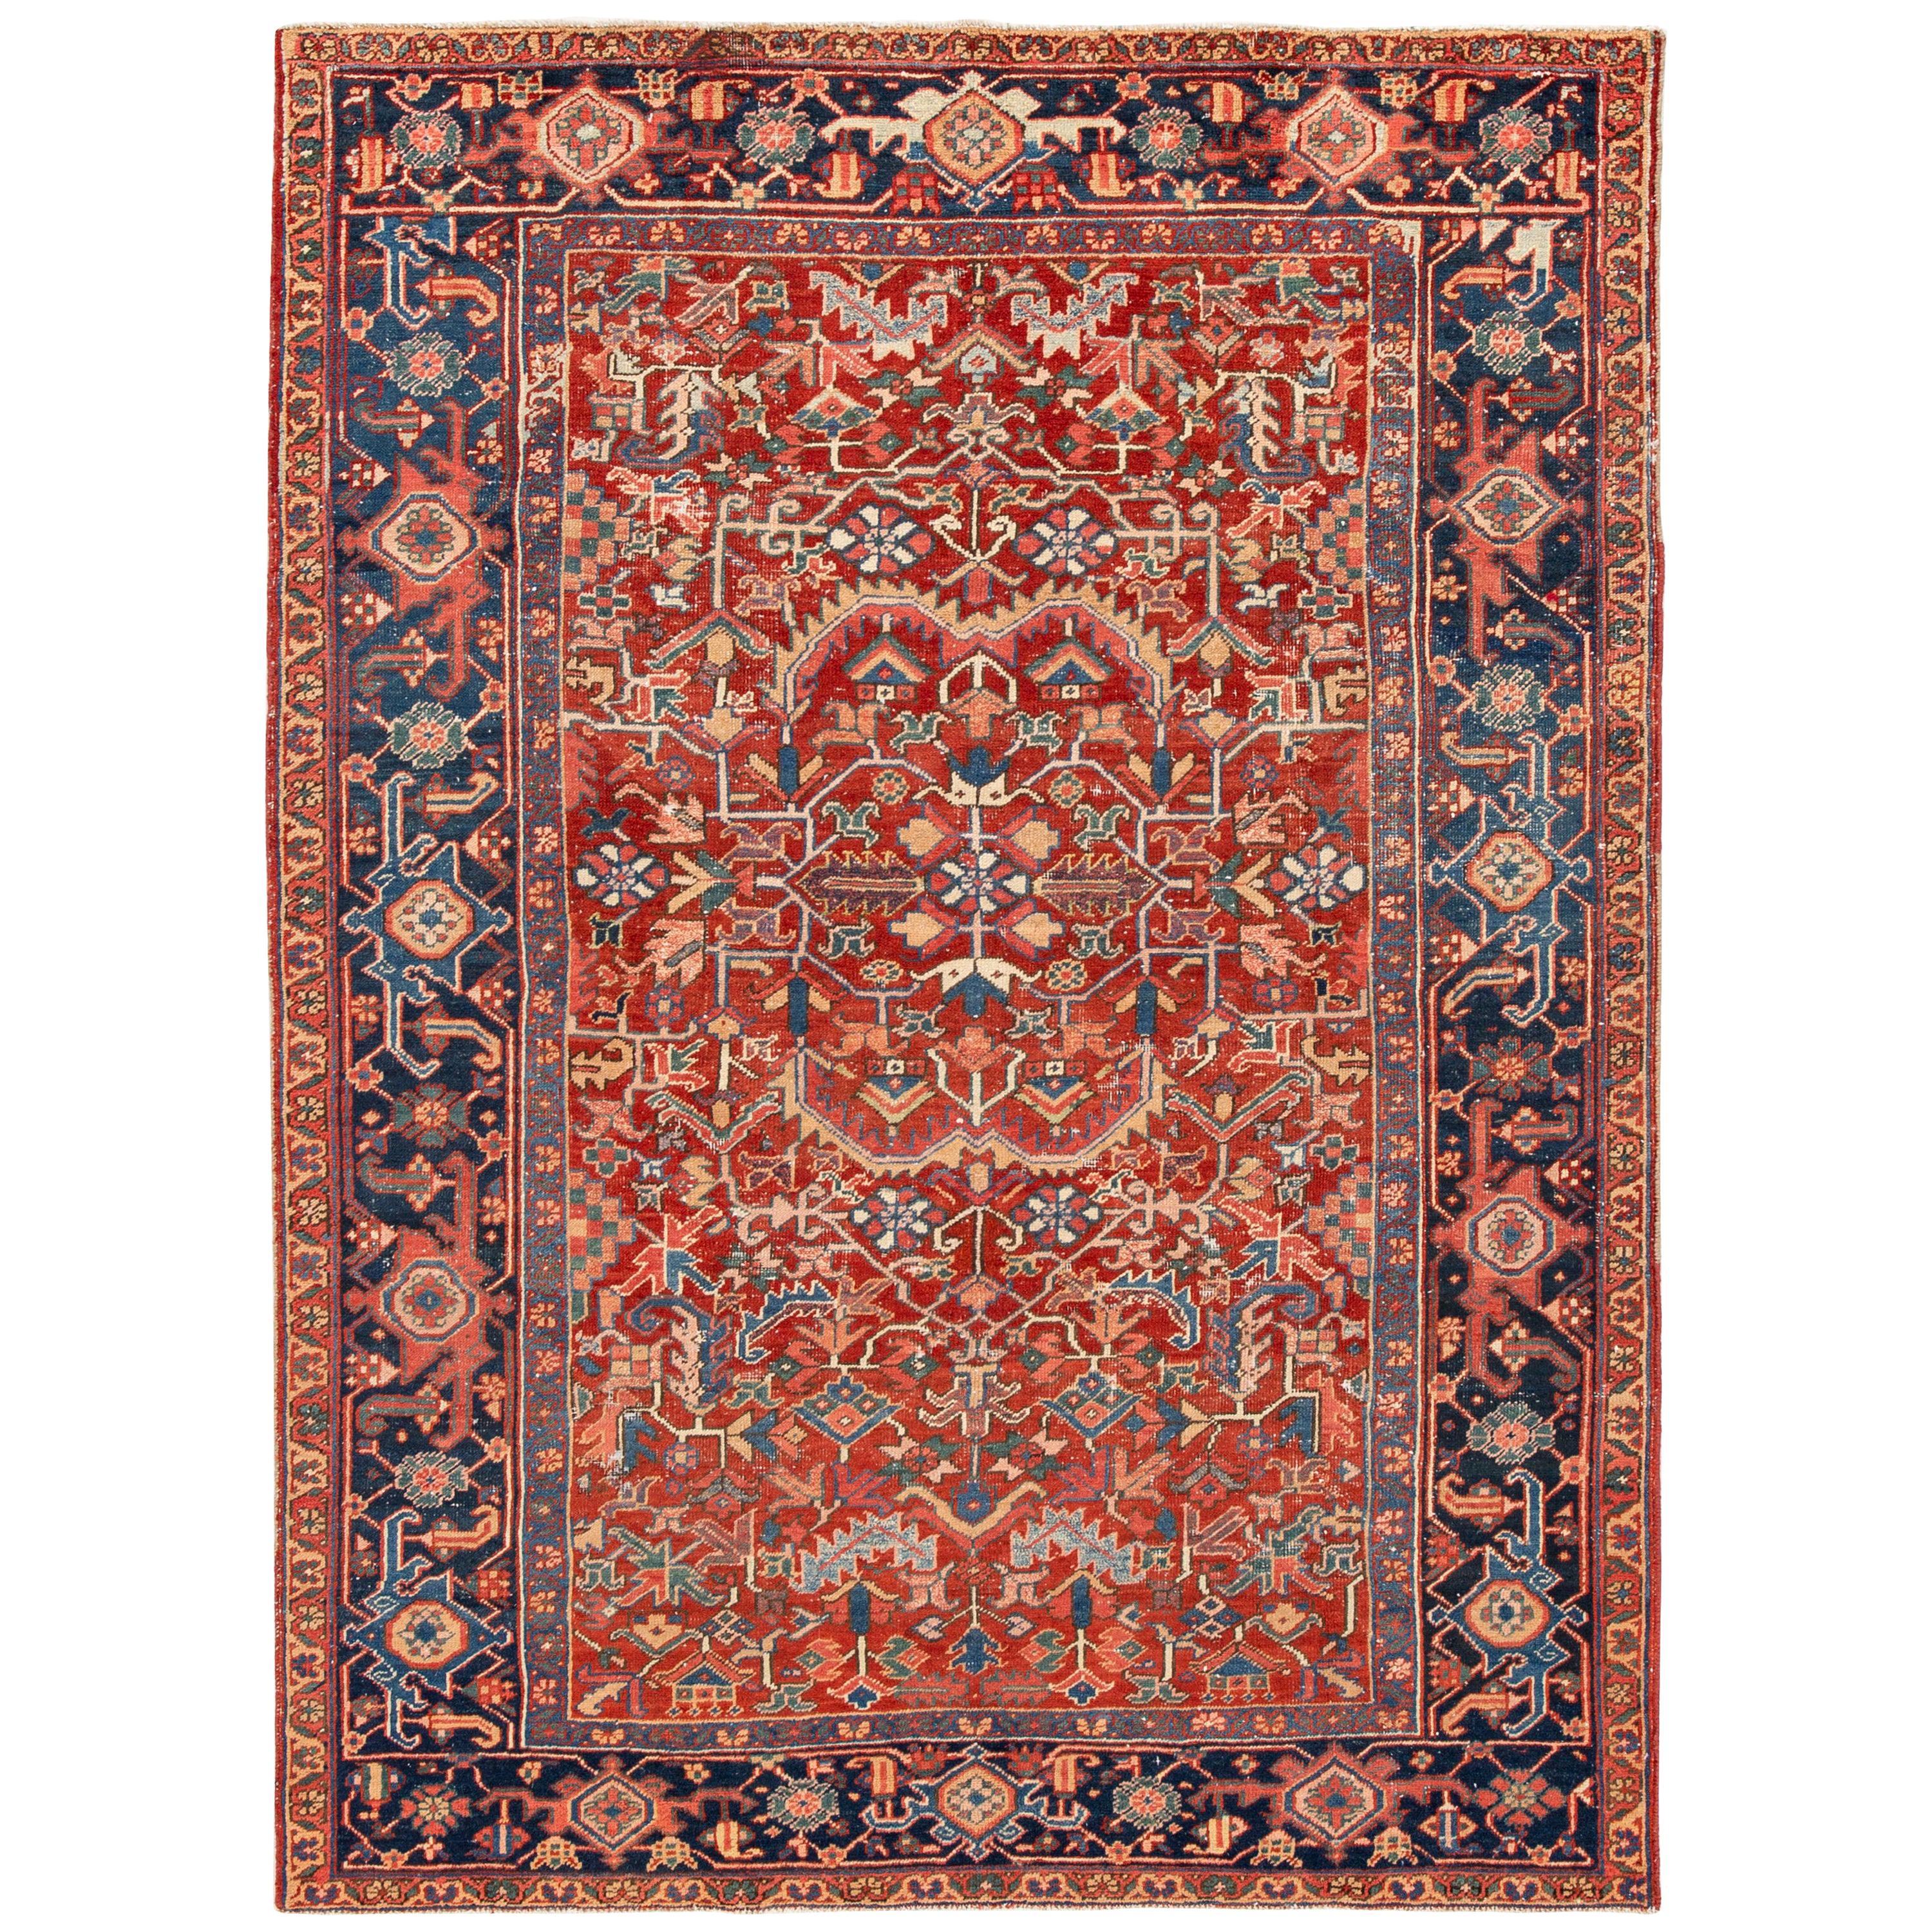 Early 20th Century Antique Distressed Persian Heriz Wool Rug